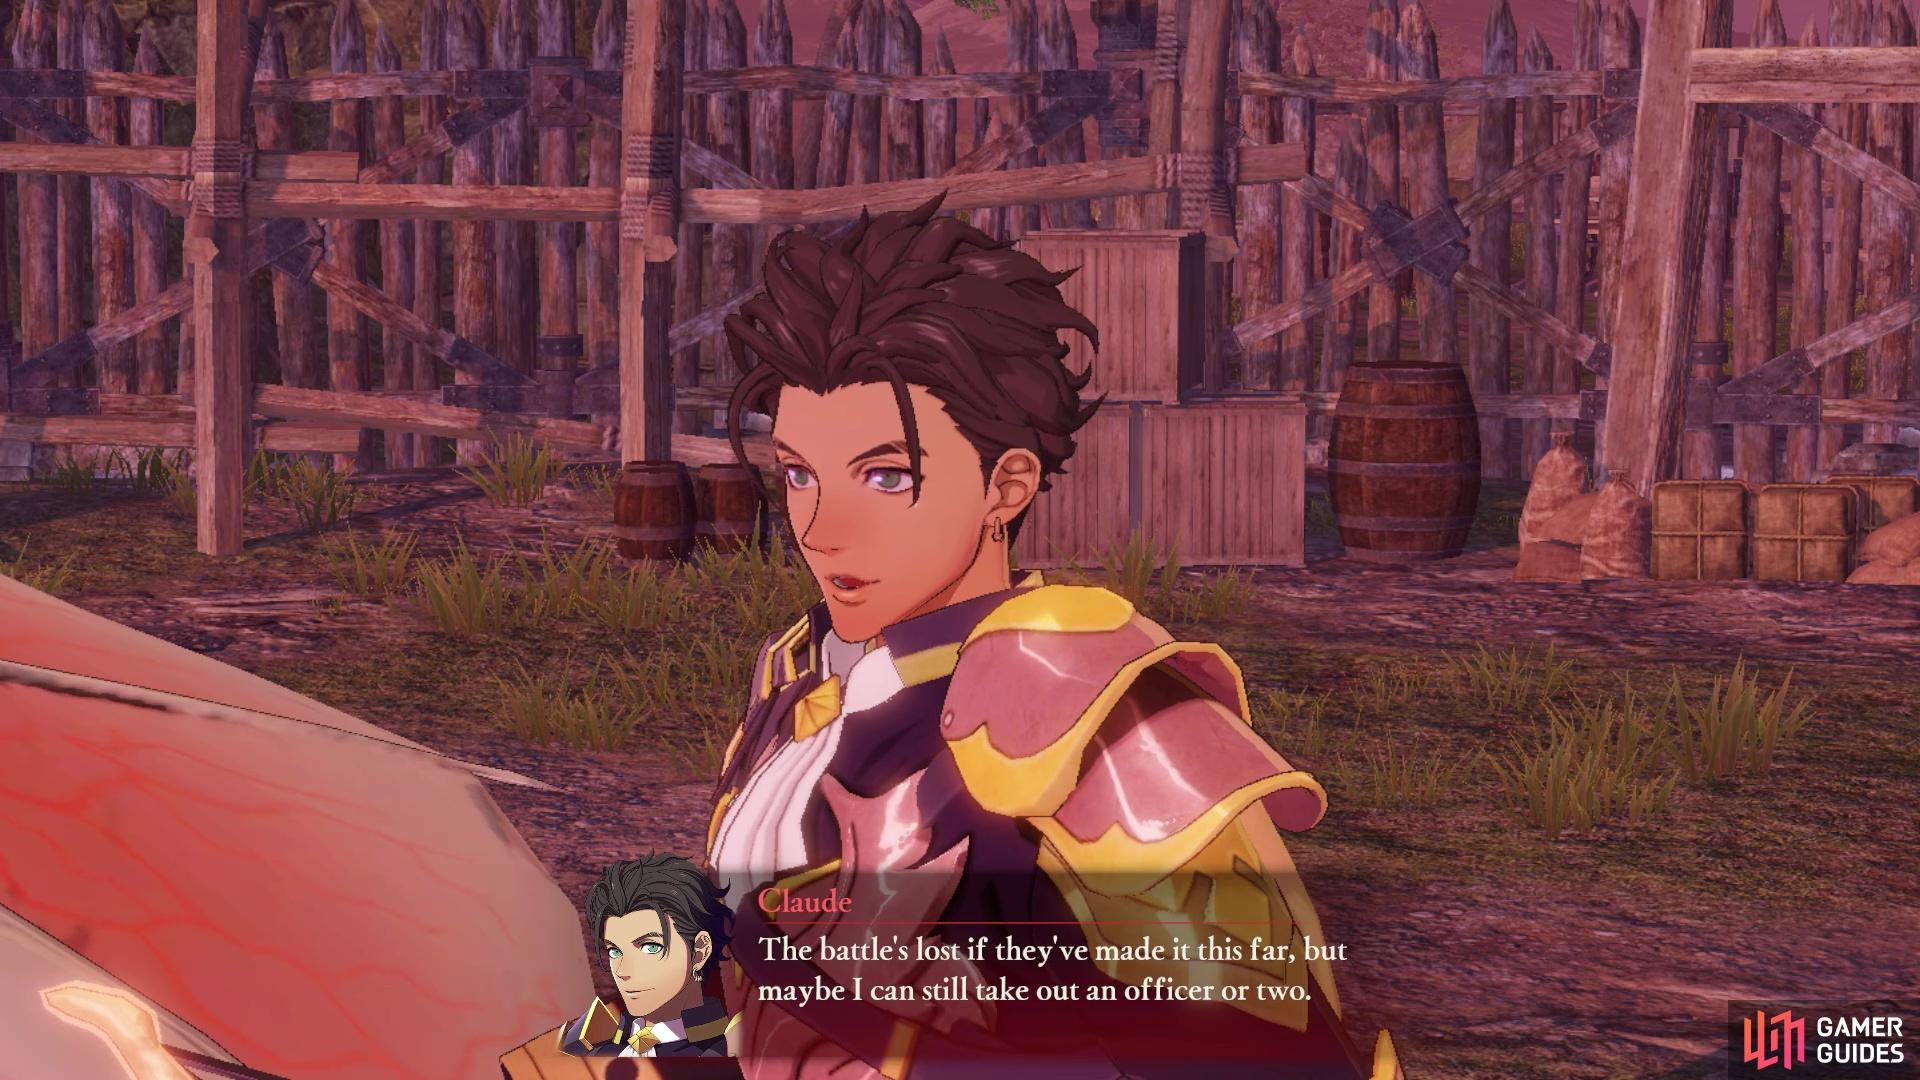 Claude uses a bow and rides a wyvern